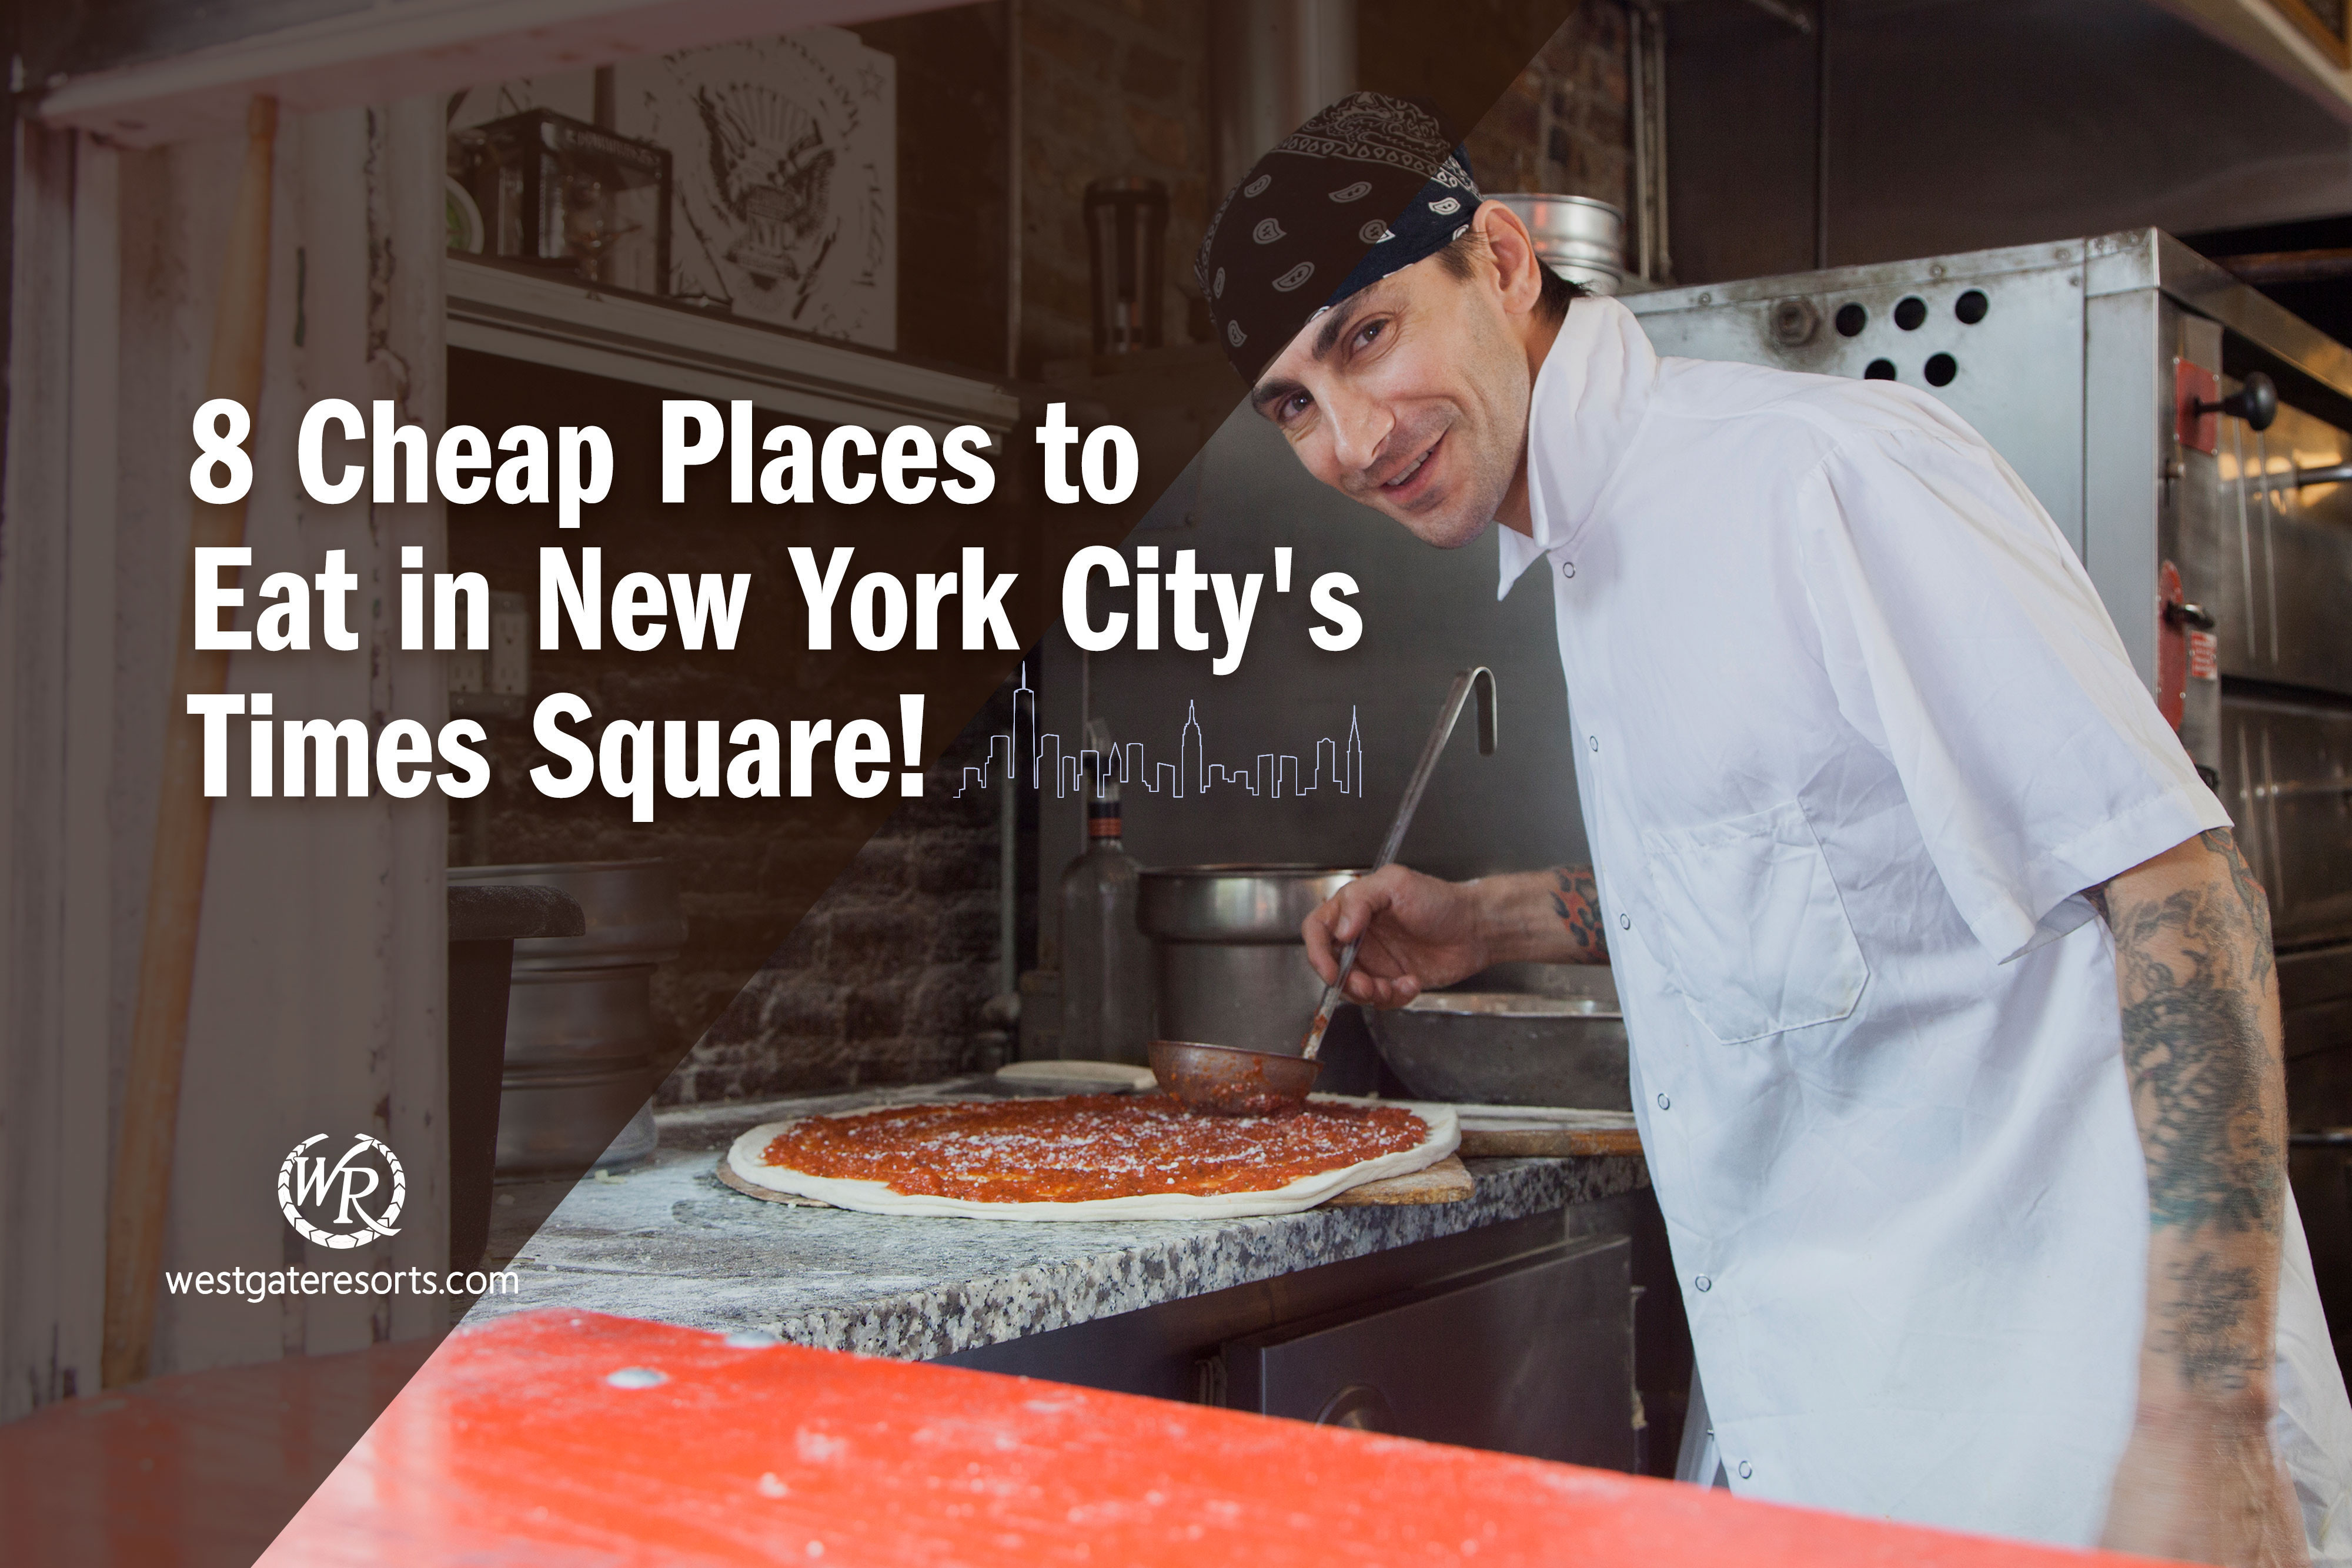 8 Cheap Places to Eat in New York City's Times Square!